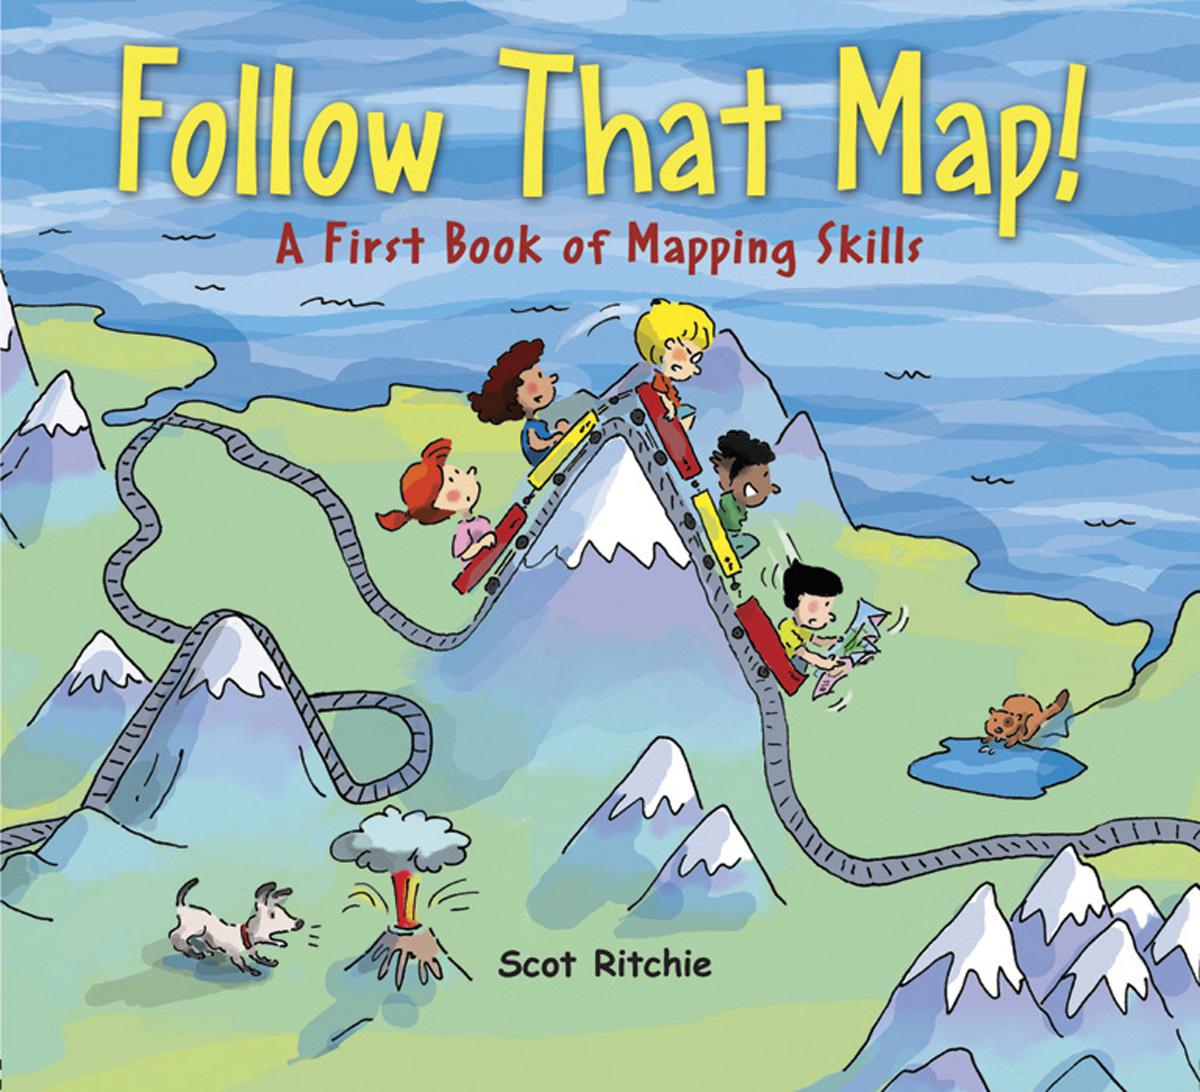  Follow That Map!: A First Book of Mapping Skills